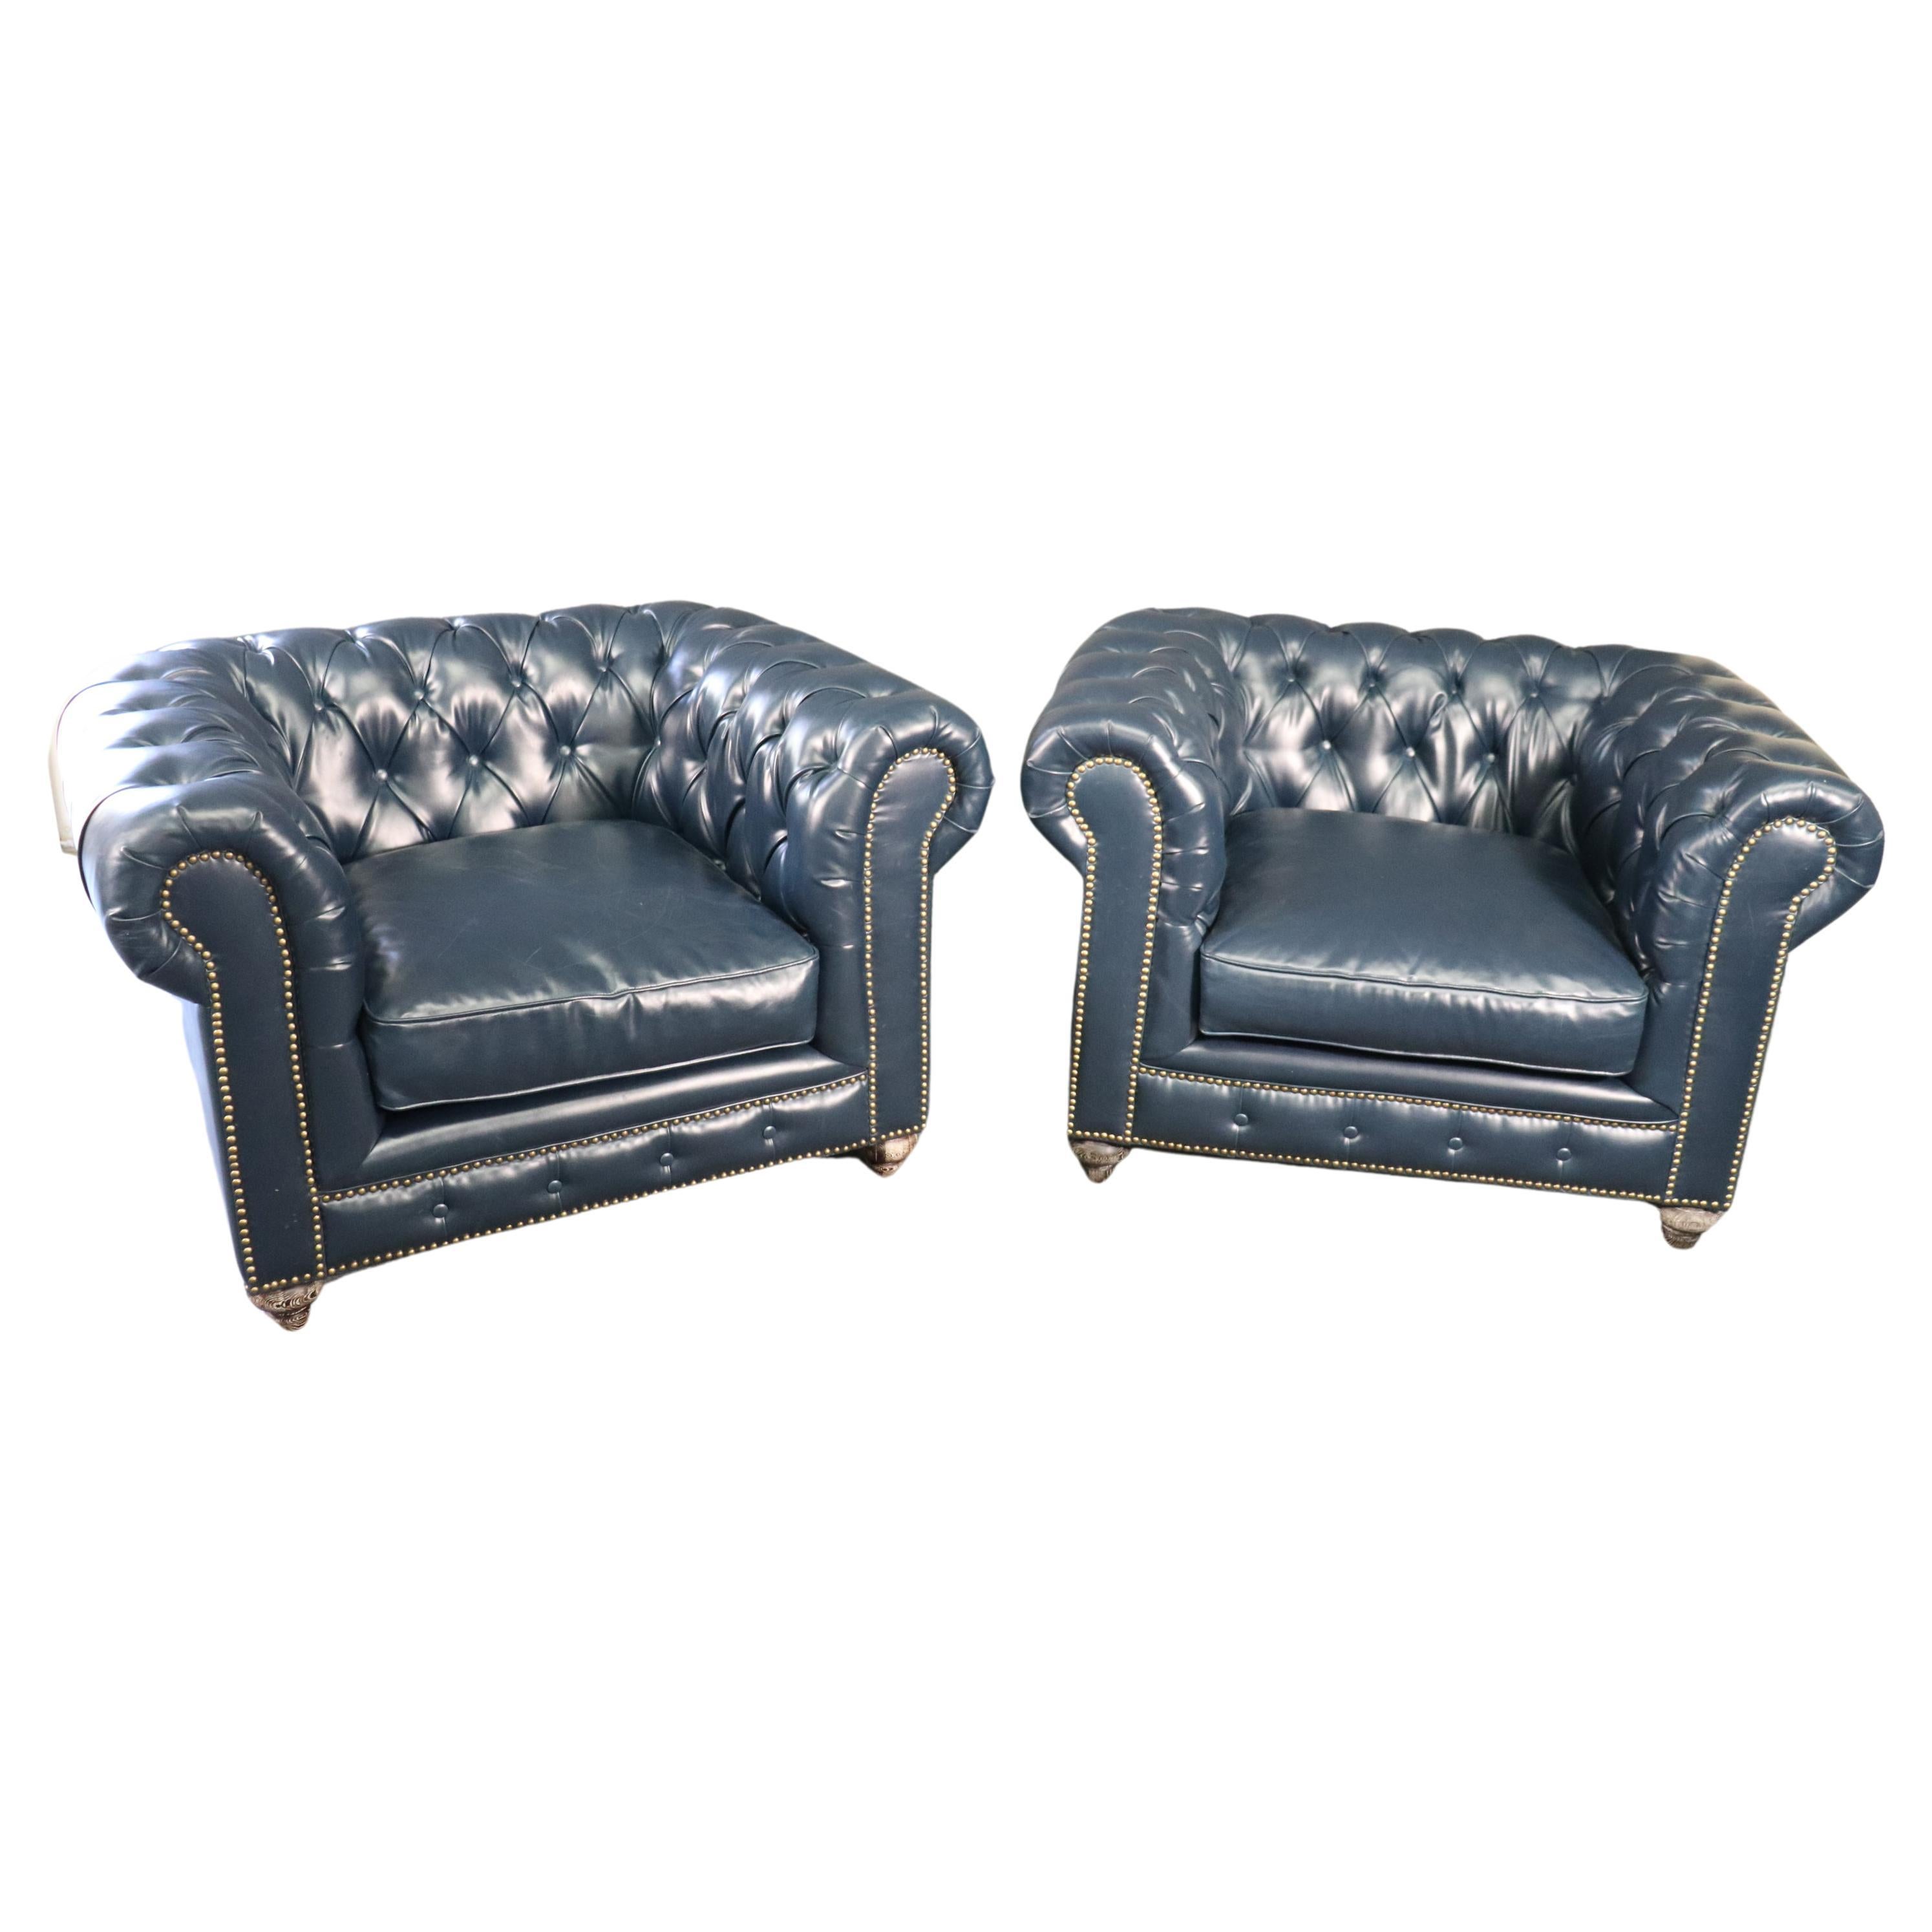 Pair High Quality Genuine Top Grain Leather Chesterfield Club Chairs Navy Blue